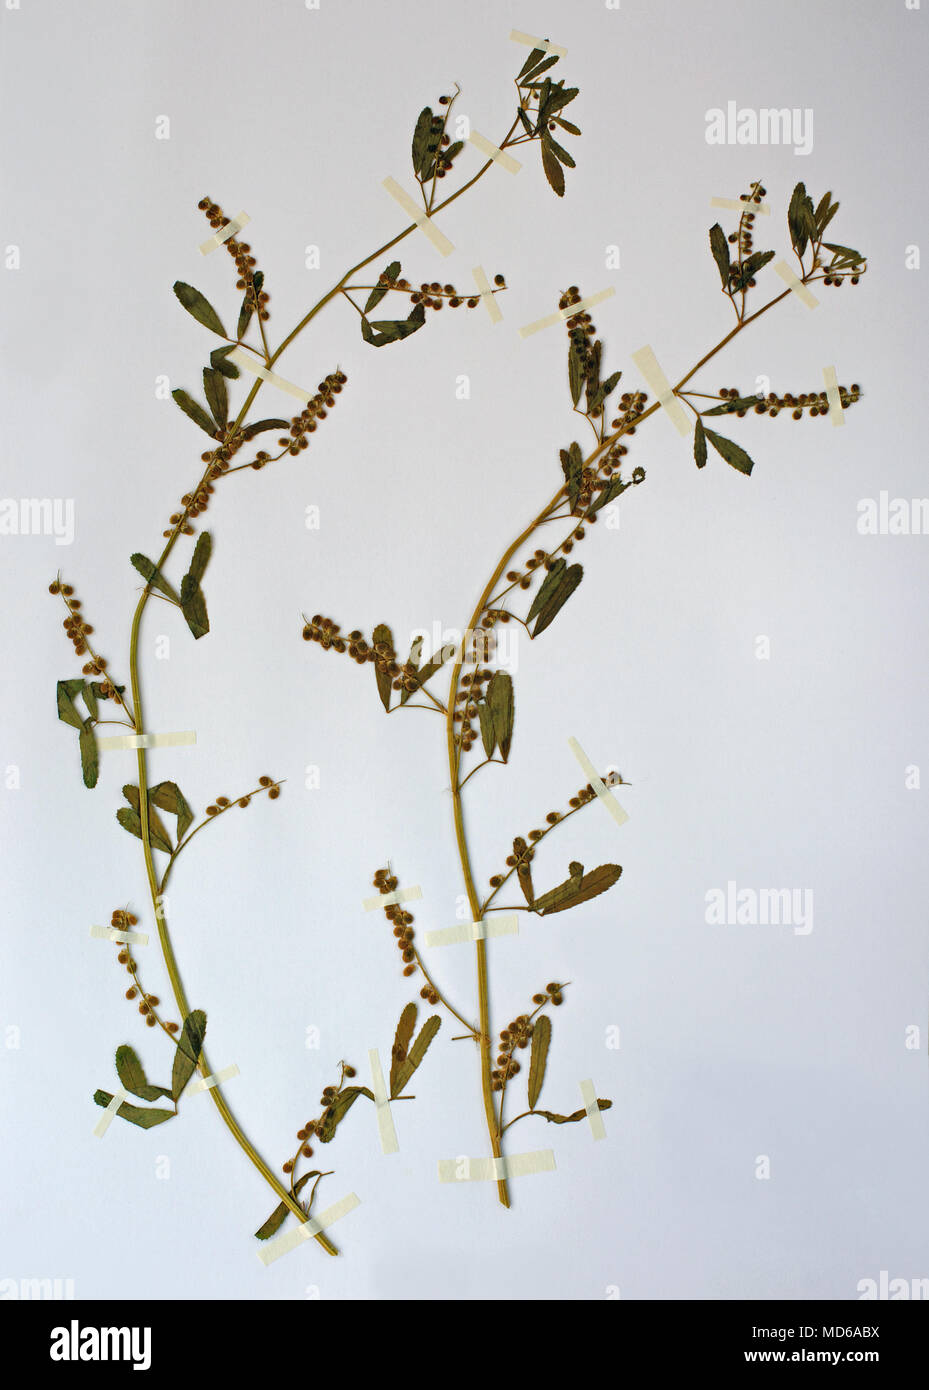 Herbarium sheet with Melilotus indicus, the Sweet clover or Saw clover, family Fabaceae (Leguminosae) Stock Photo